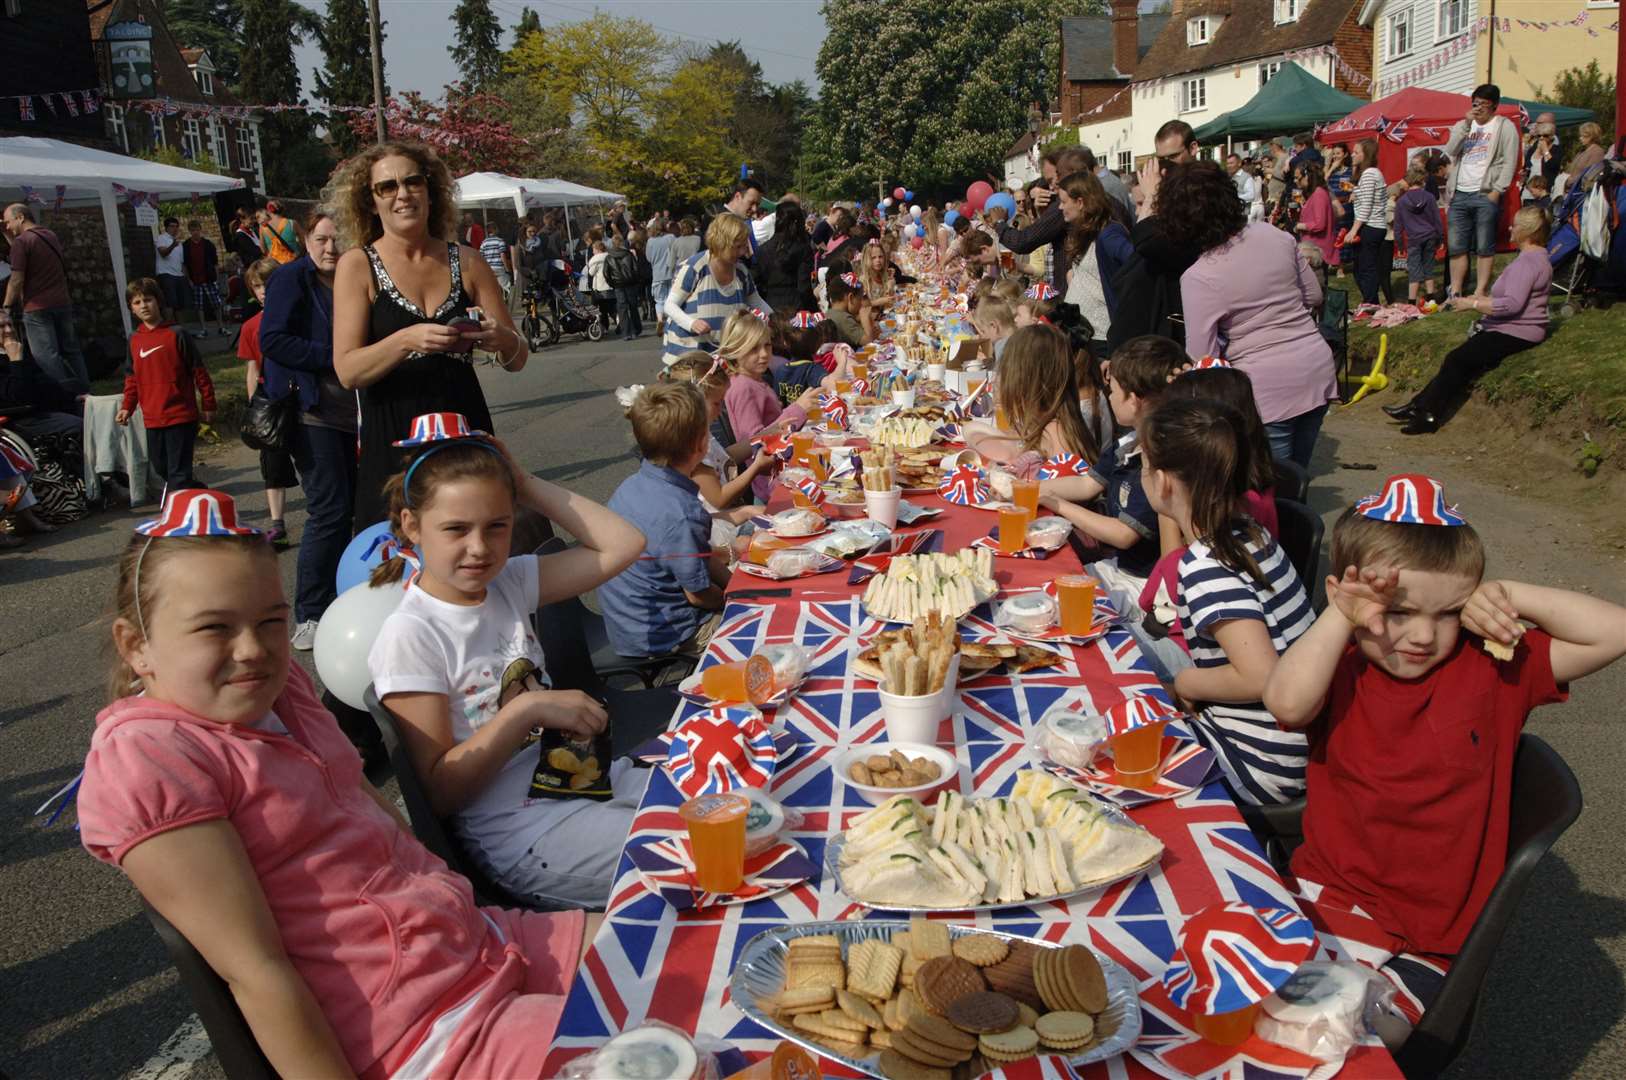 A street party in Yalding in 2011 to celebrate the wedding of William and Kate